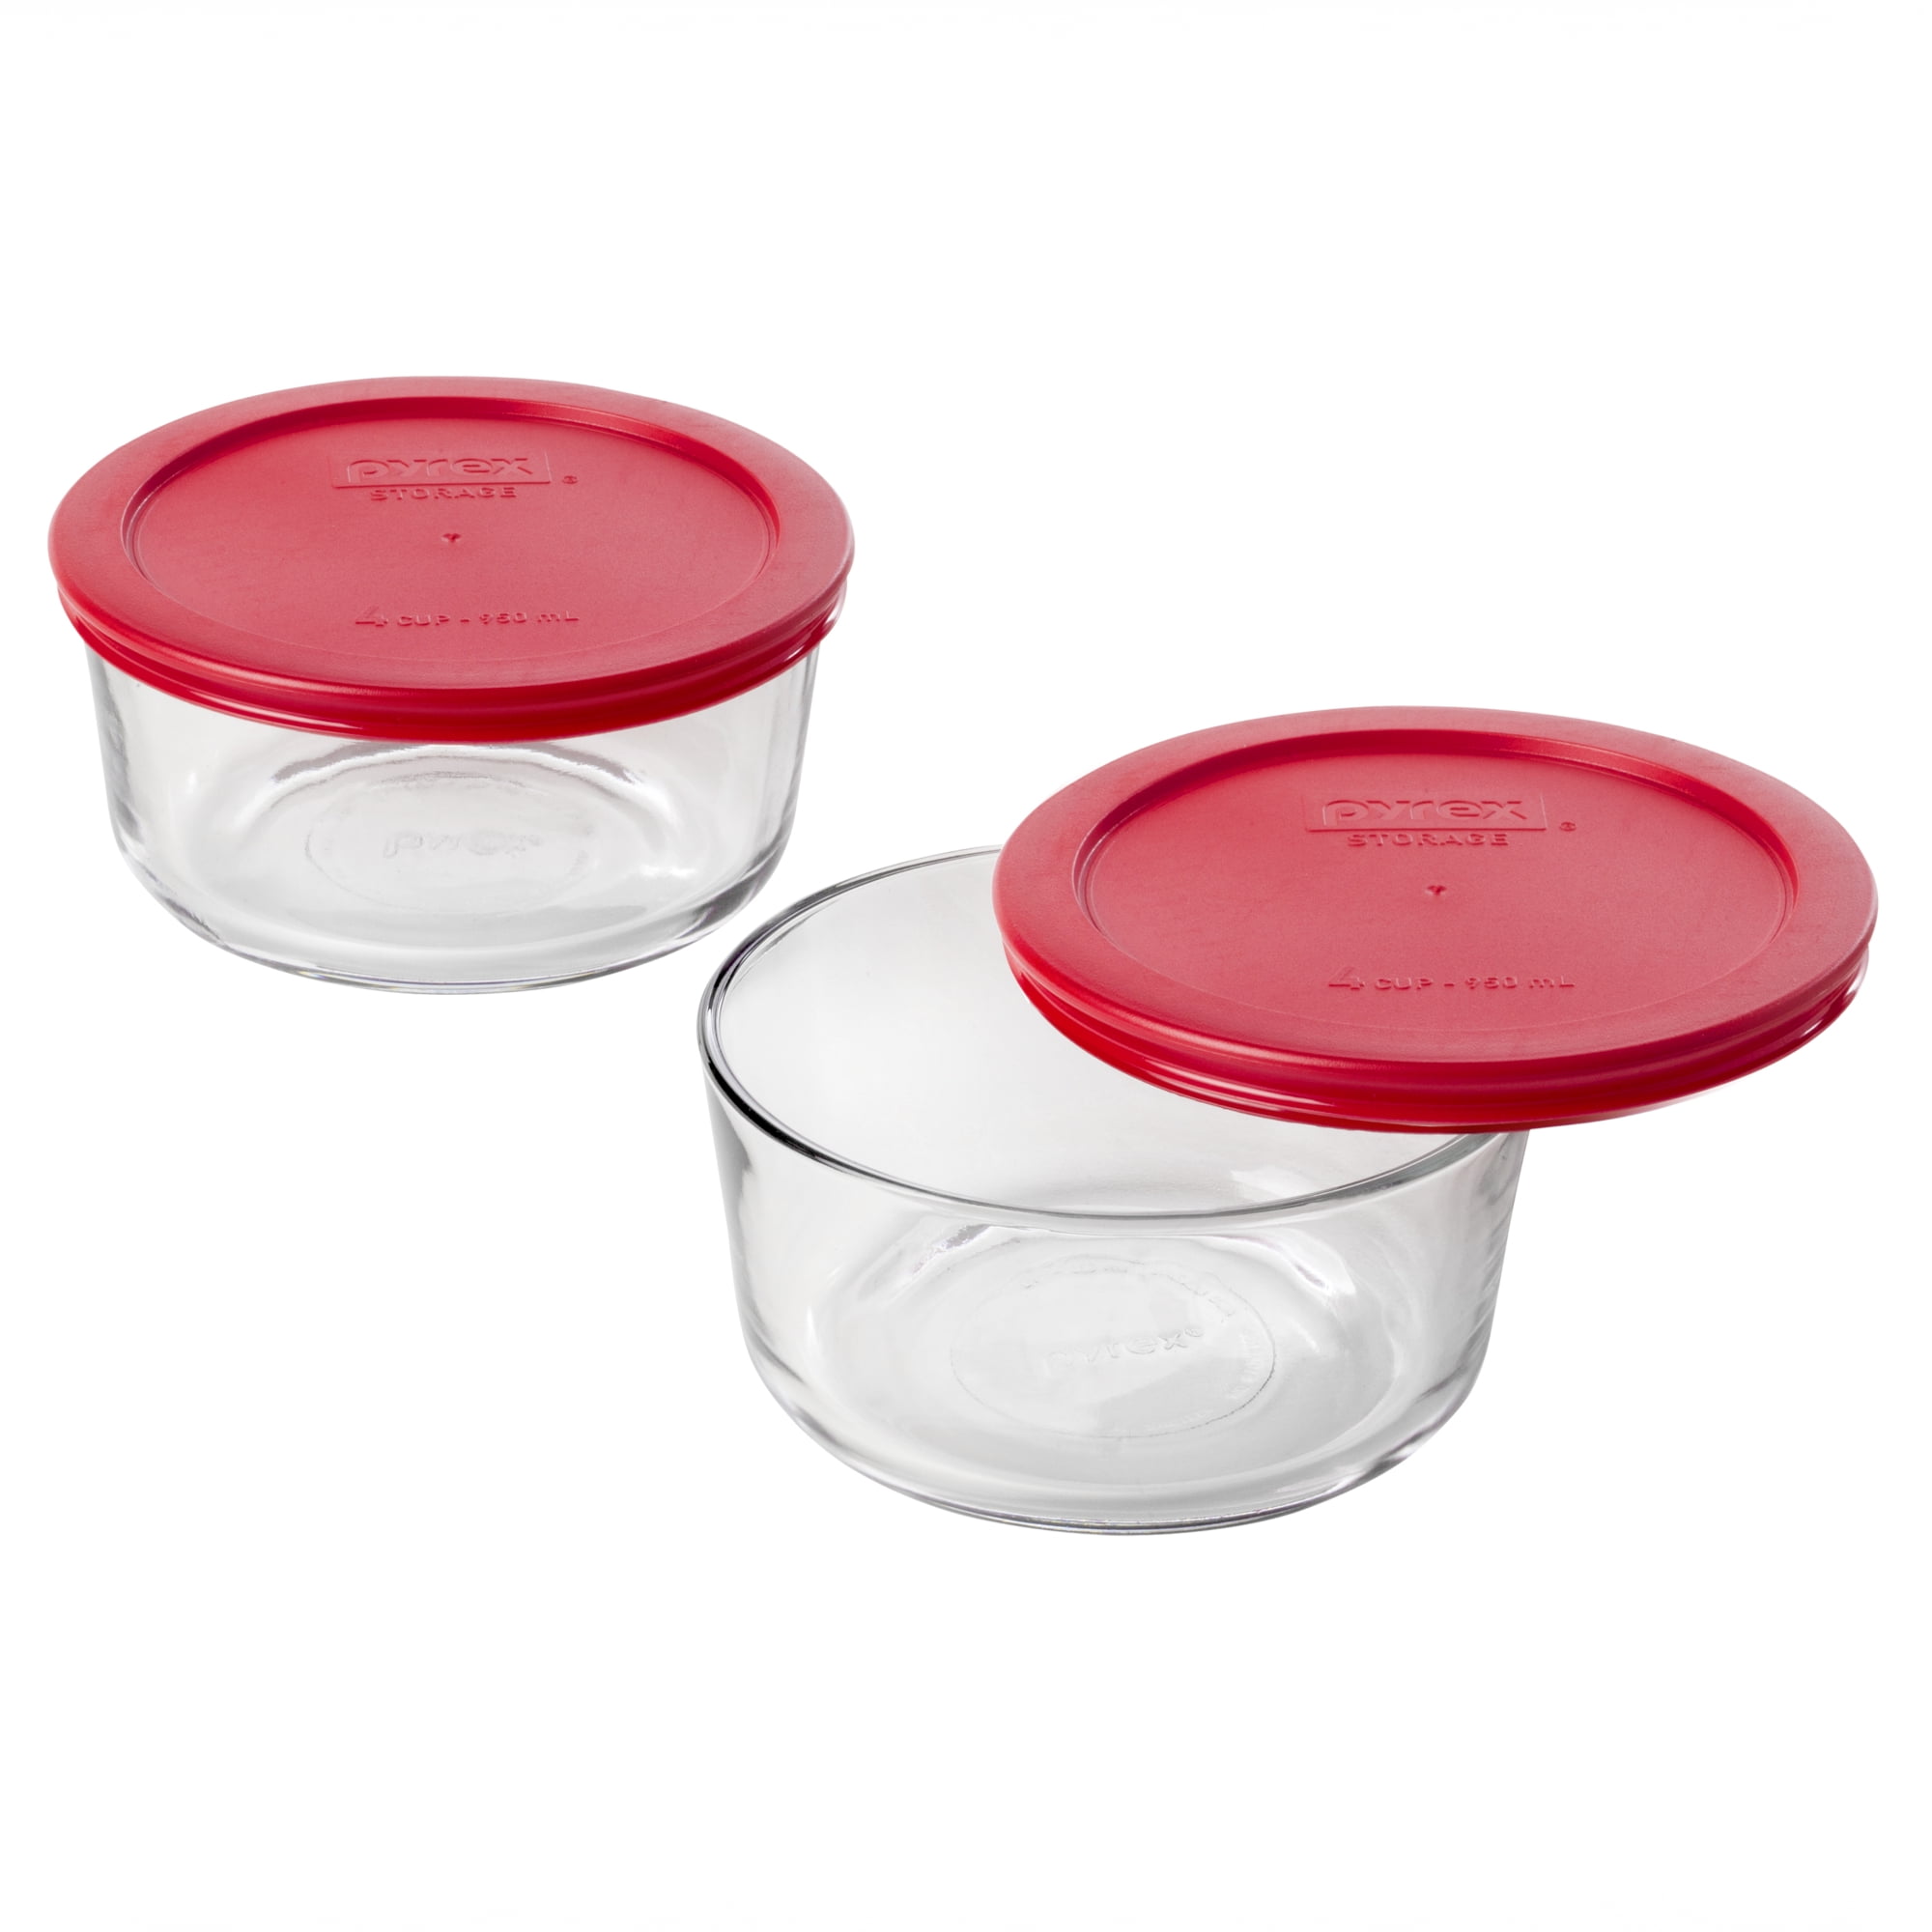 Pyrex 4 Cup Glass Round Storage Container Blue : Target